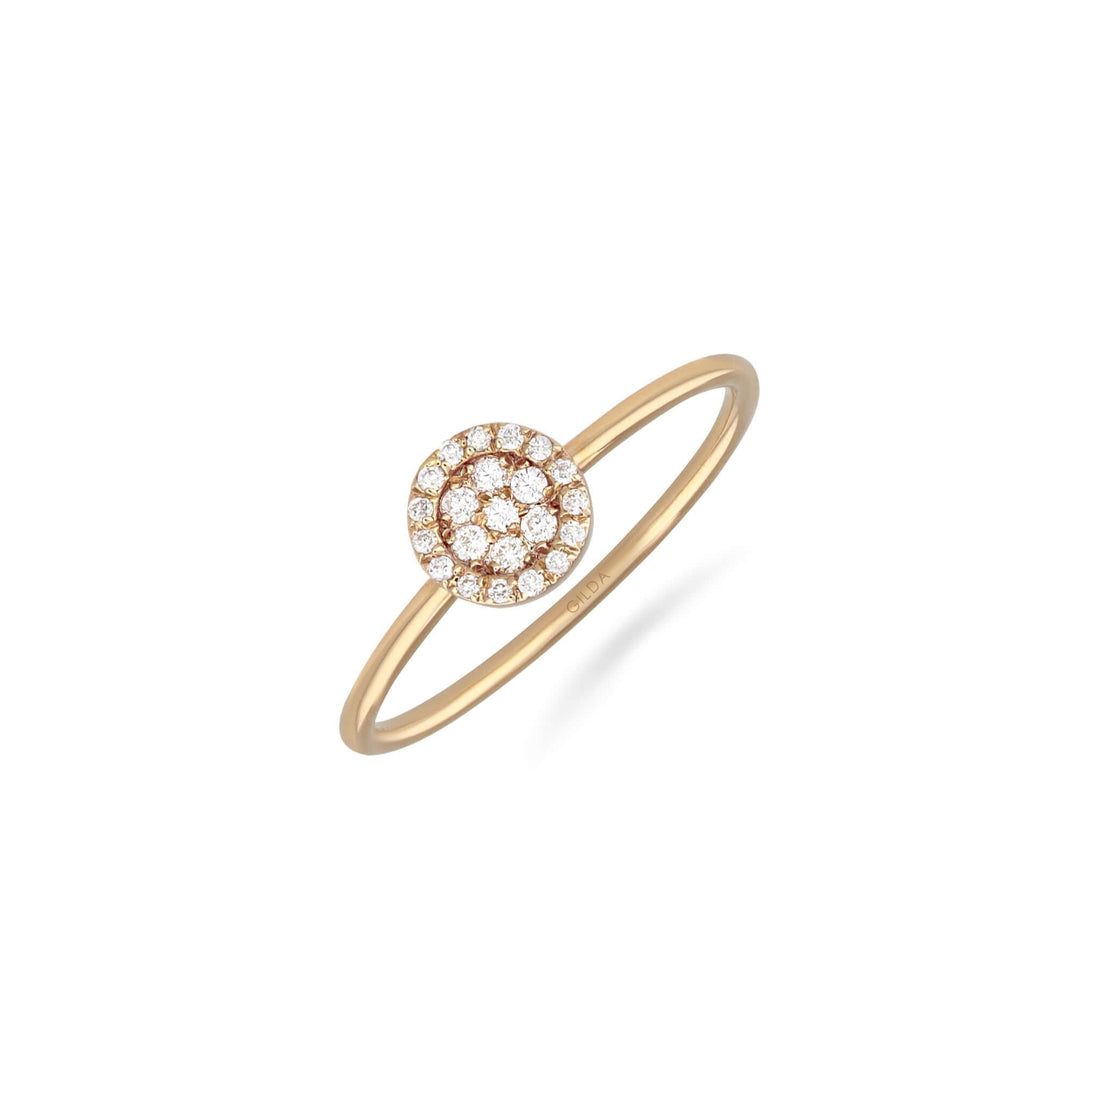 Jewelry Minnies | Diamond Ring | 0.11 Cts. | 14K Gold - ring Zengoda Shop online from Artisan Brands